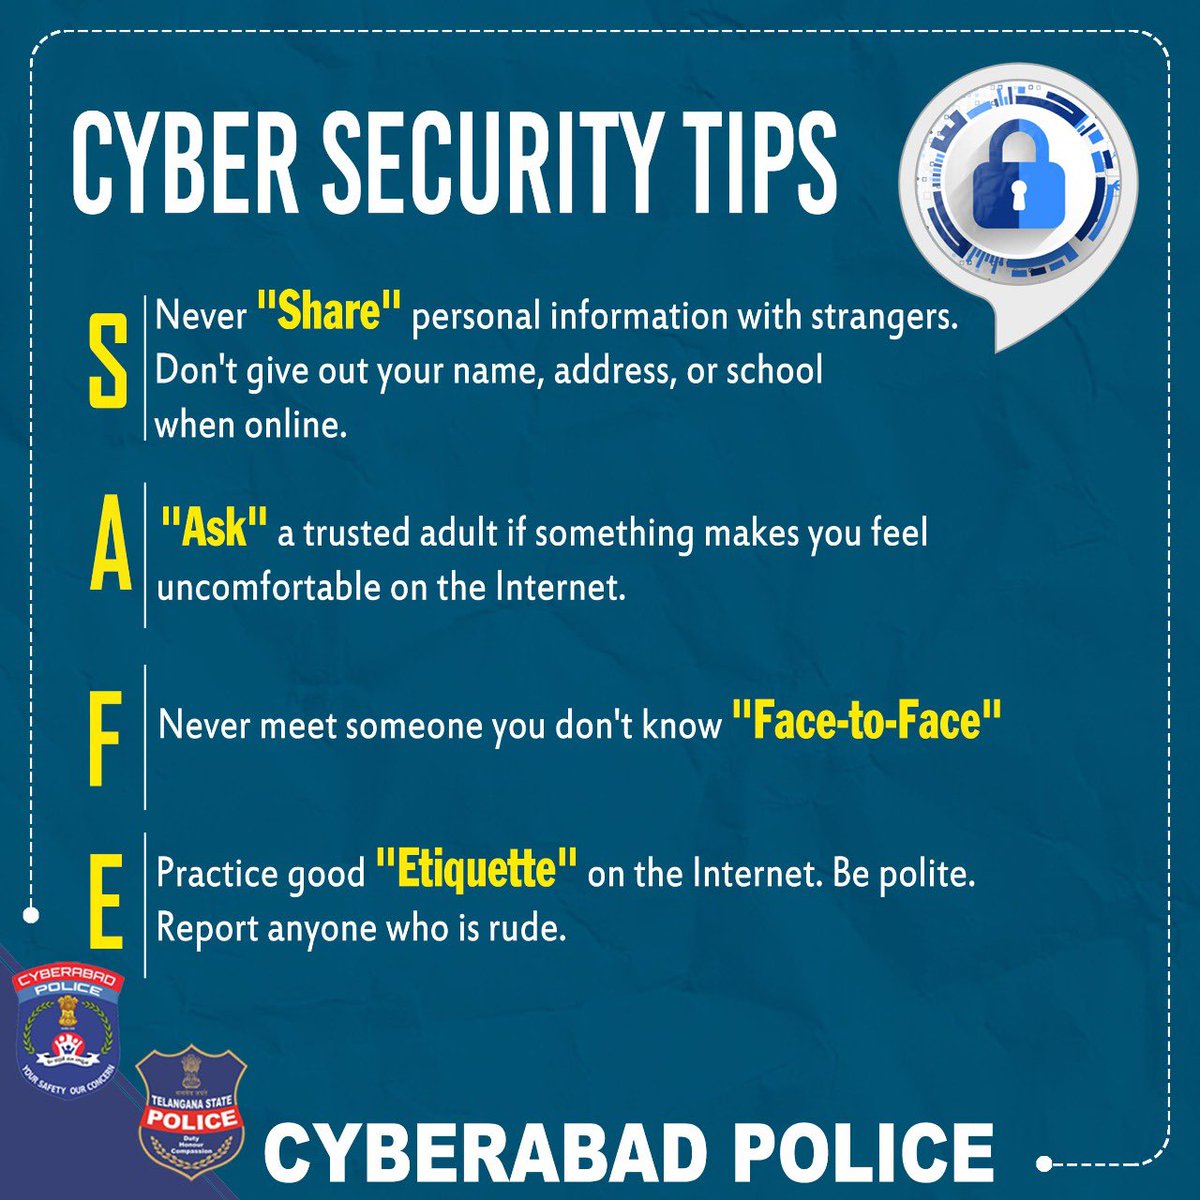 Cyber Safety tips for everyone! Have a safe browsing.

#CyberSafety #CyberSafetyTips #OnlineSafety